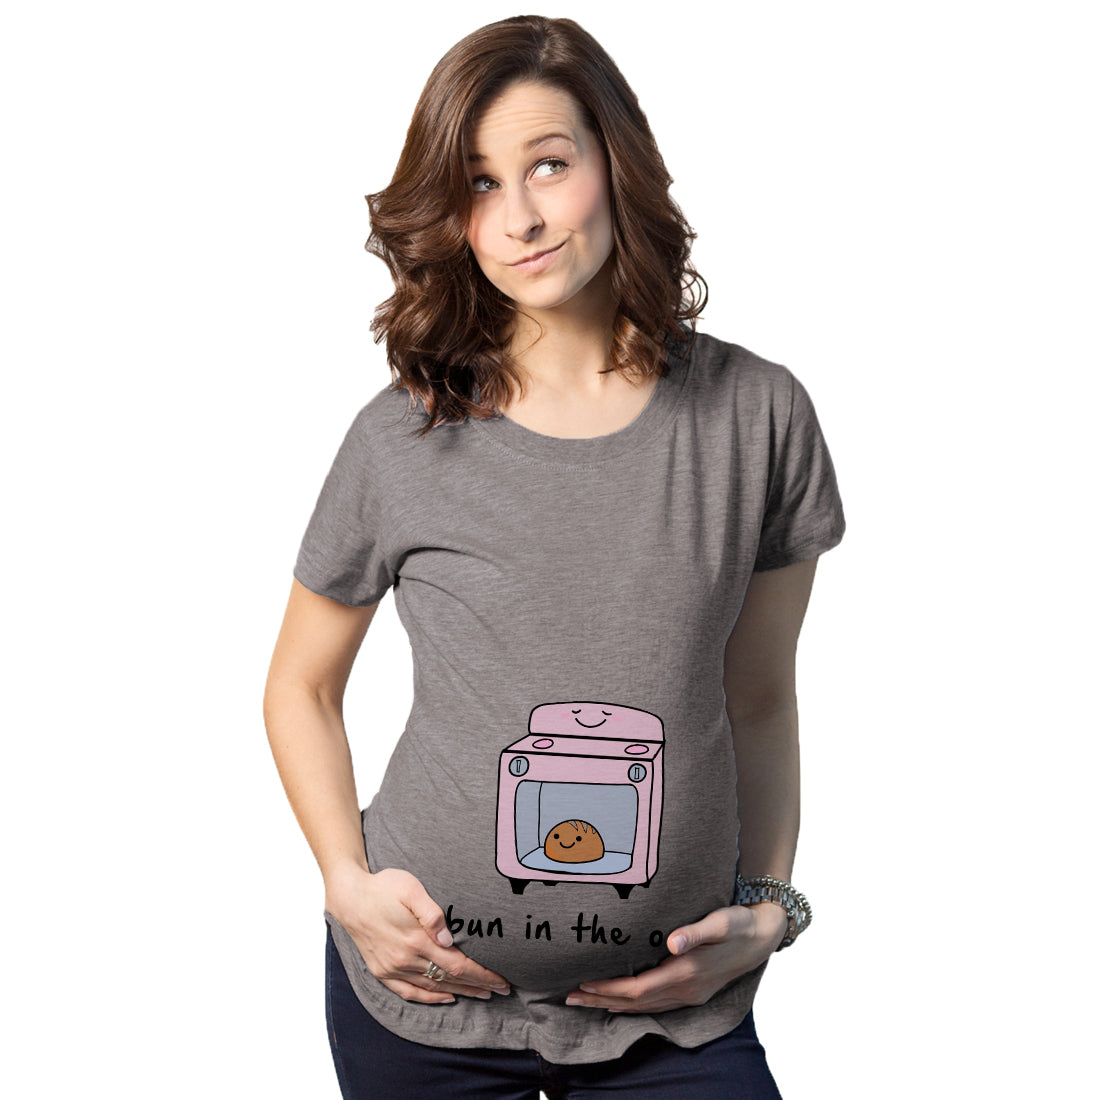 Bun In The Oven Maternity T Shirt